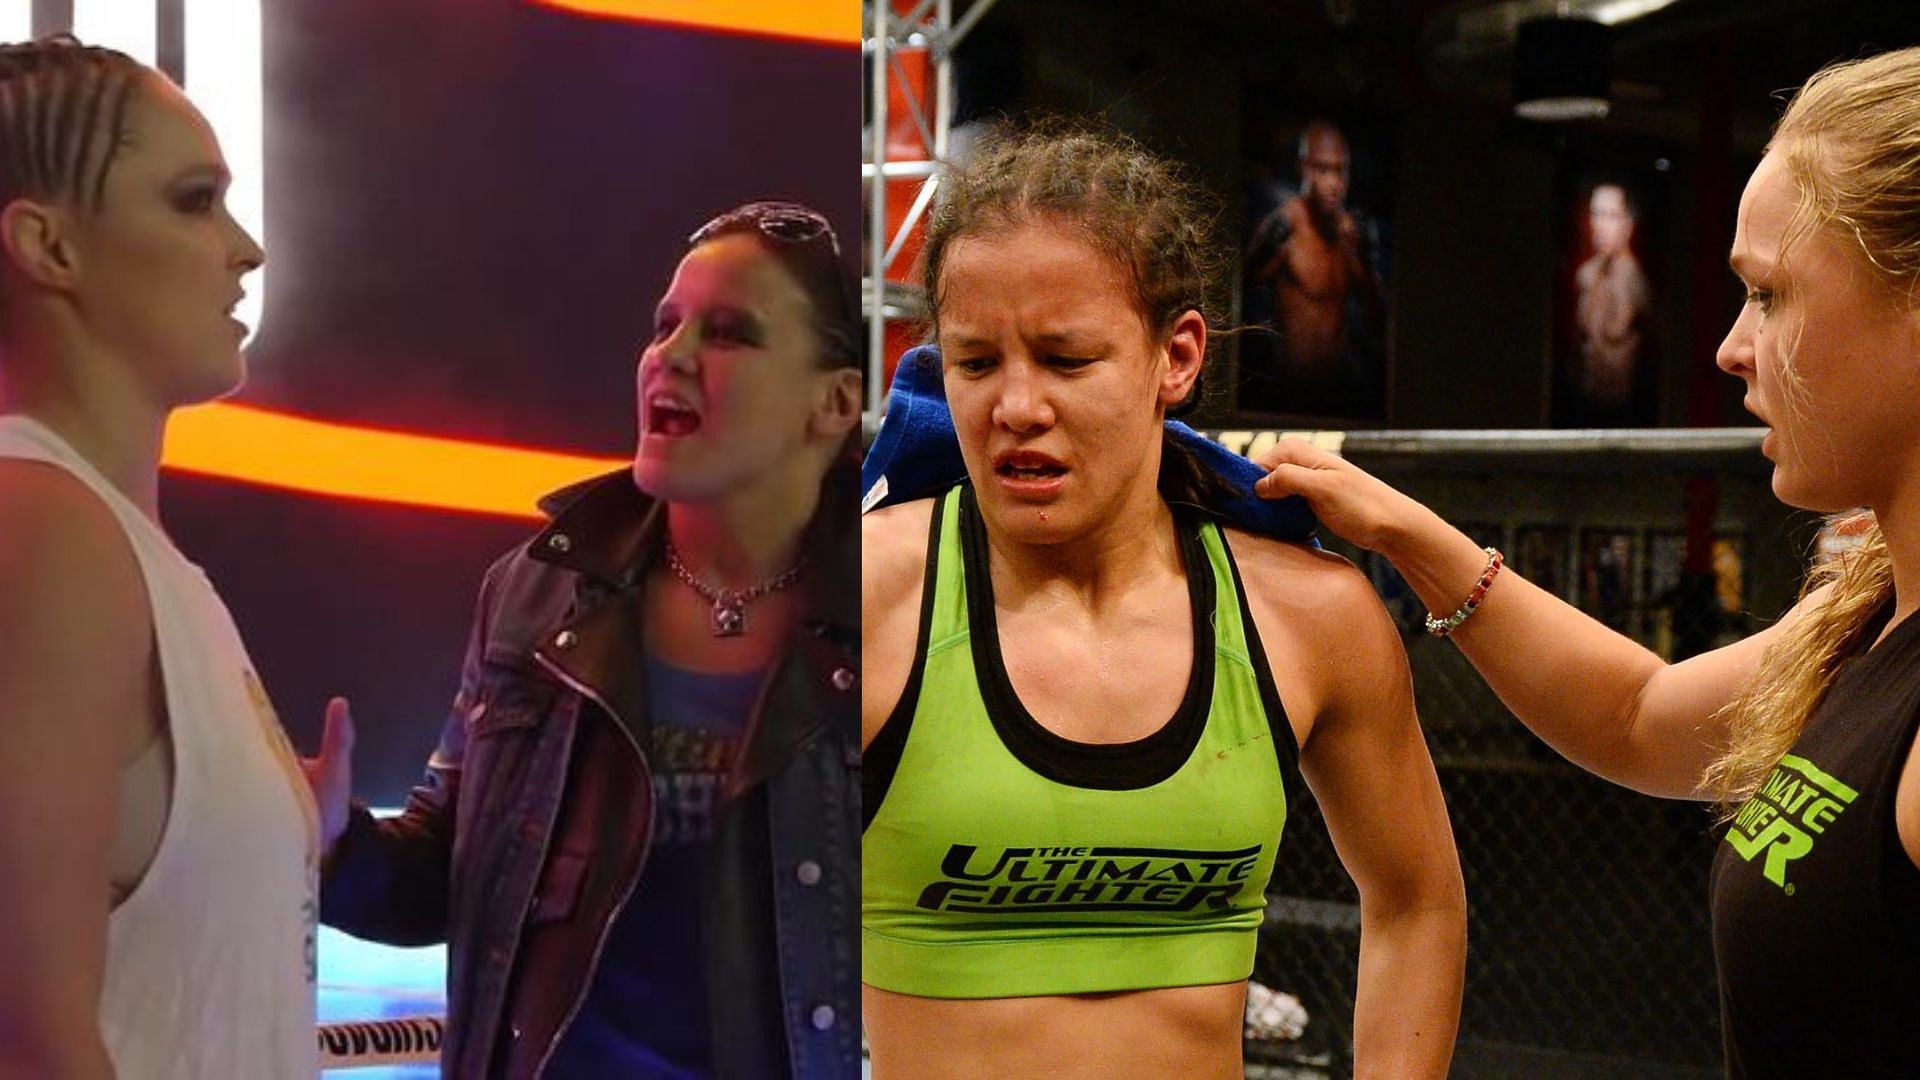 WWE SmackDown Superstars Ronda Rousey and Shayna Baszler